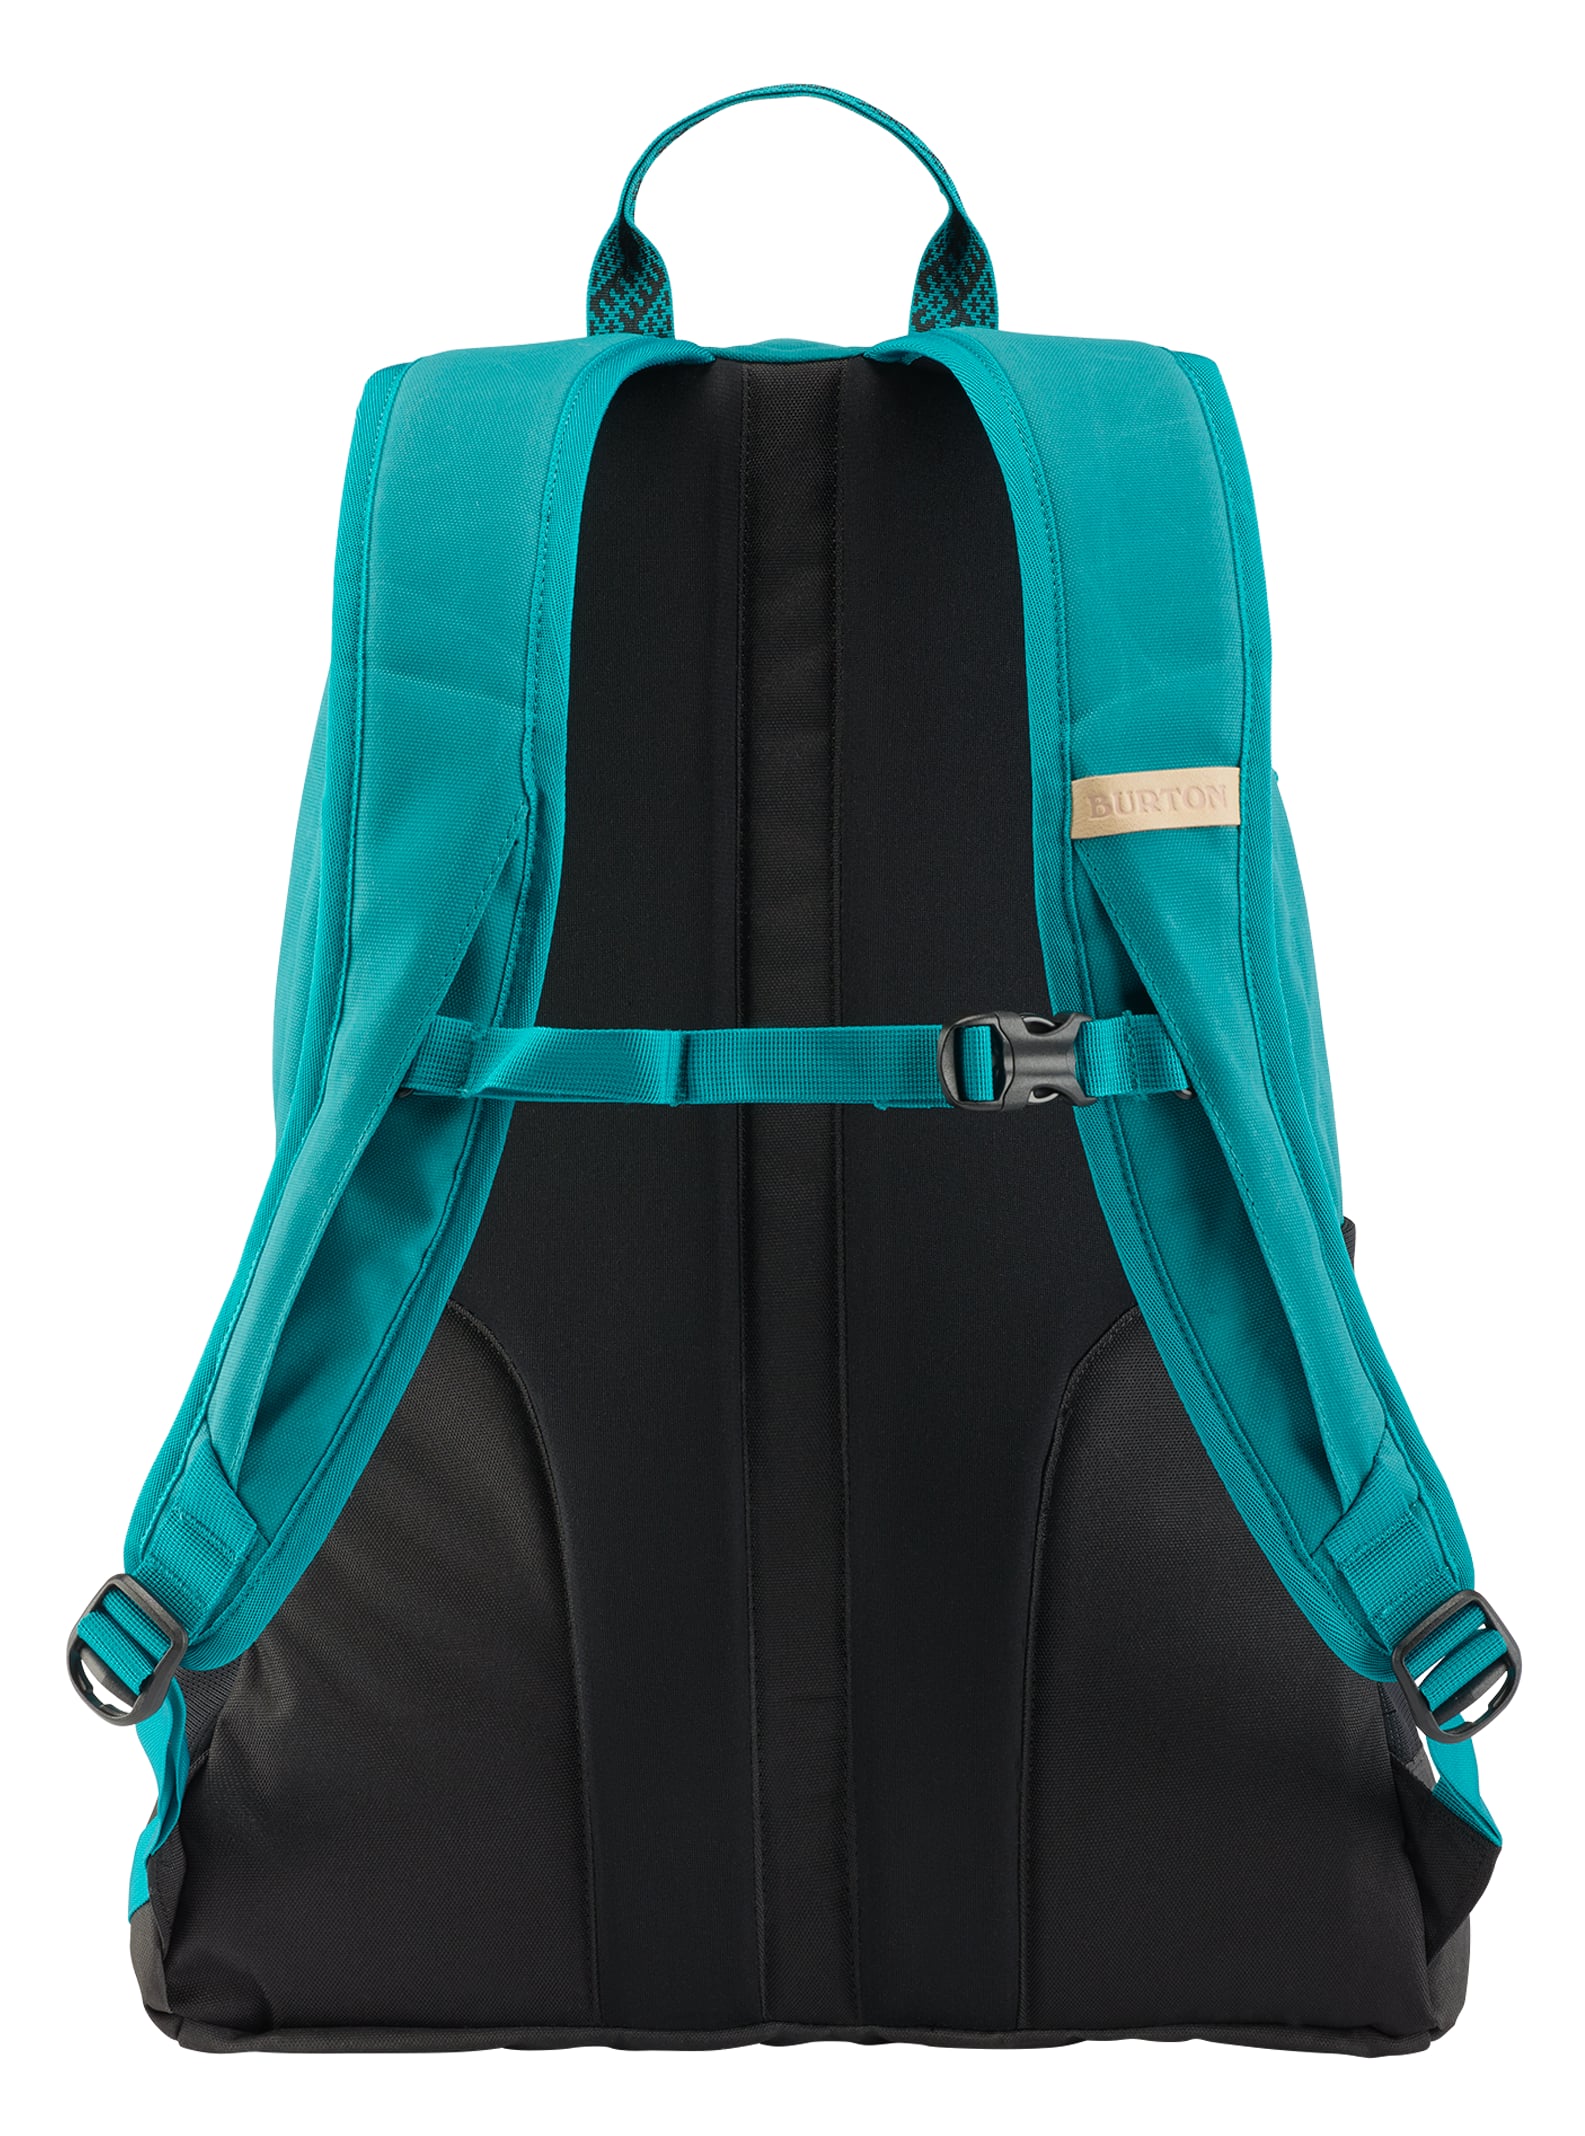 Water Bottle Pockets Burton Shackford Backpack with Padded Laptop Sleeve Compression Straps 